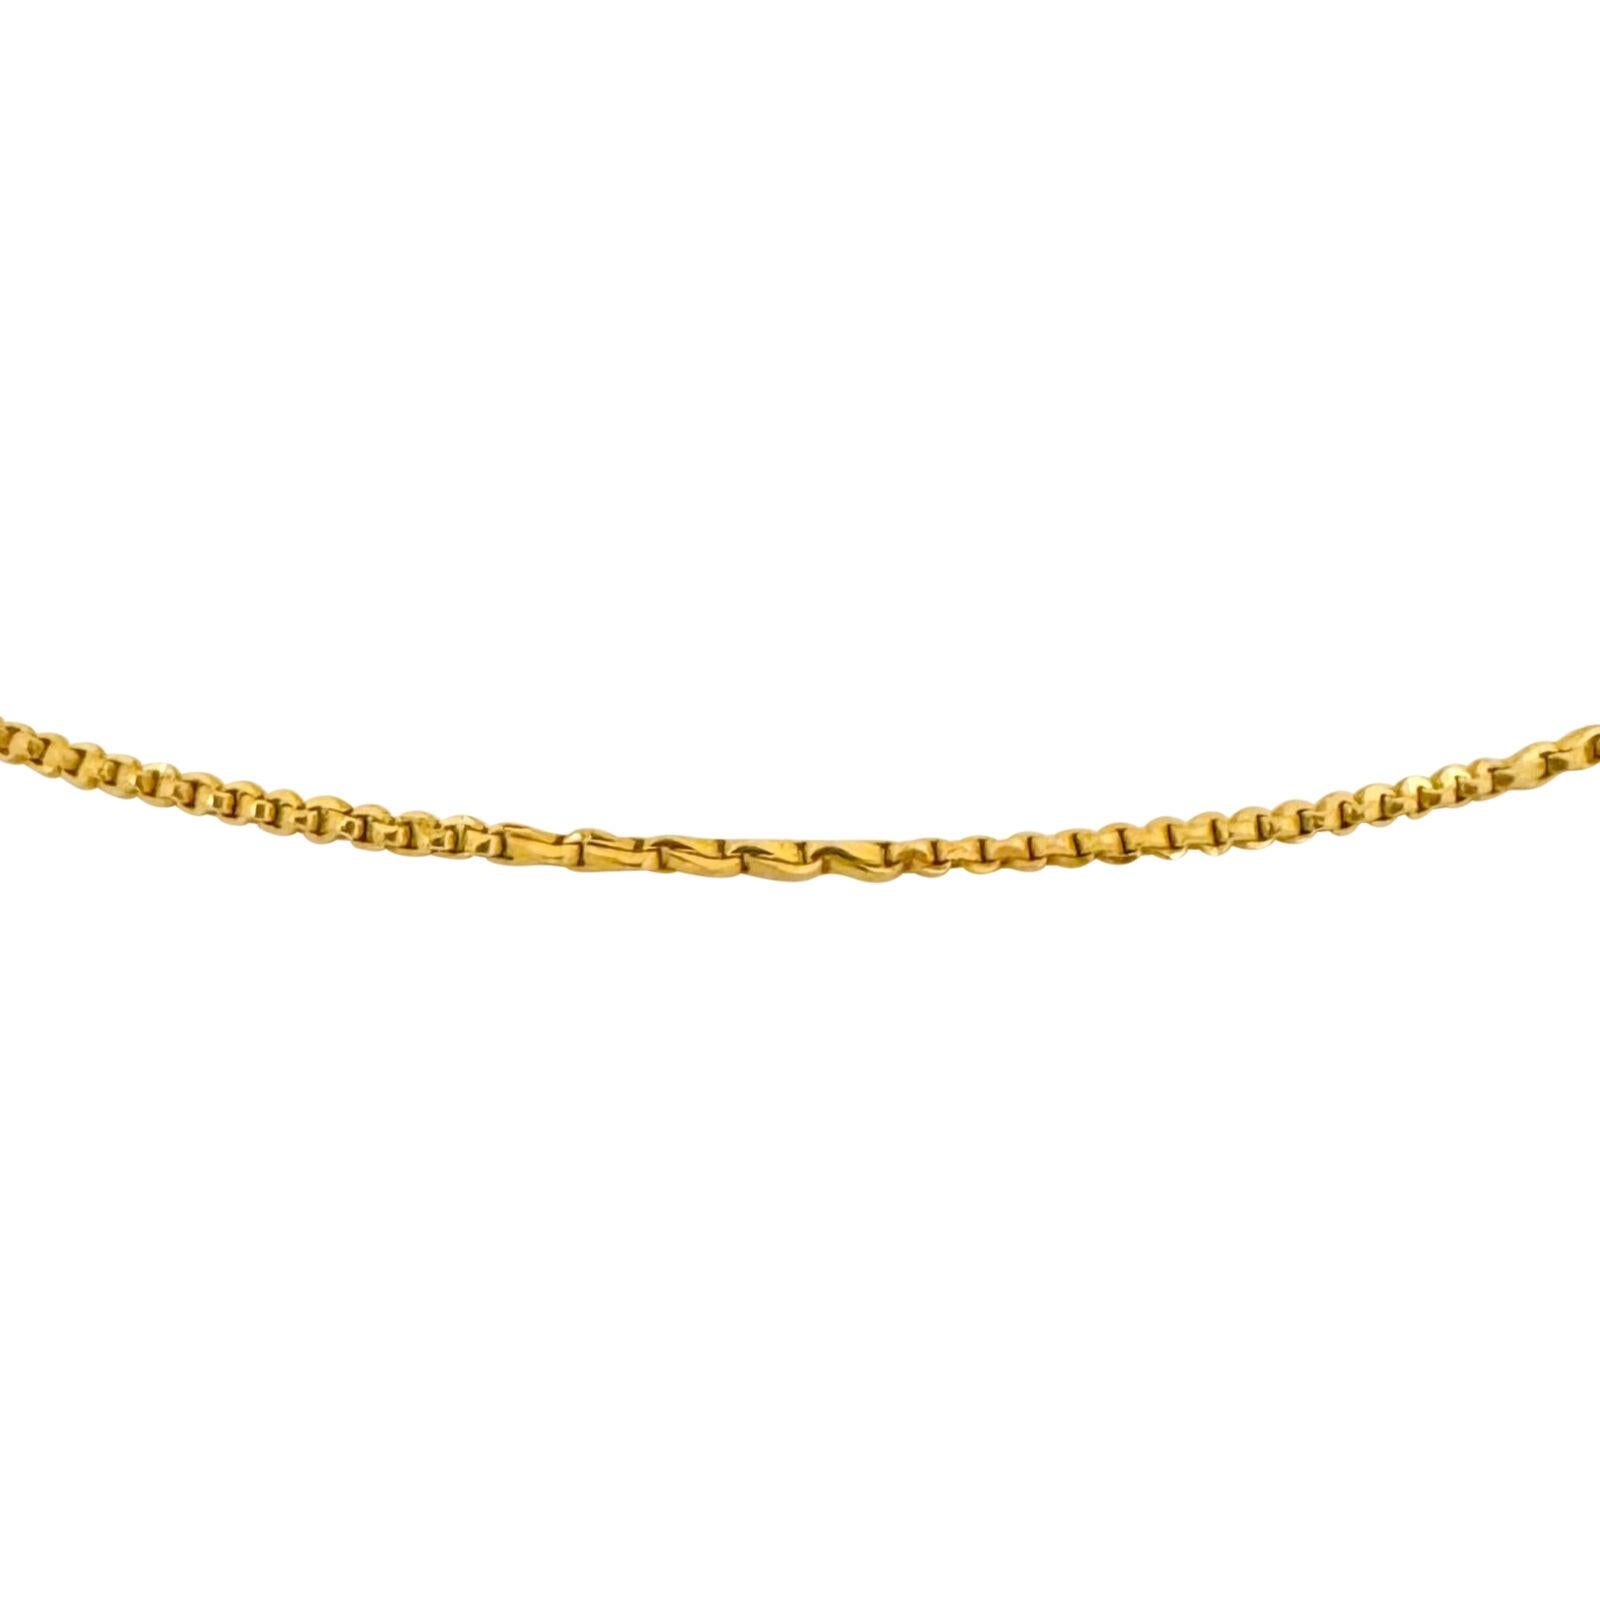 22 Karat Yellow Gold Solid Thin Fancy Cable Link Chain Necklace  In Good Condition For Sale In Guilford, CT